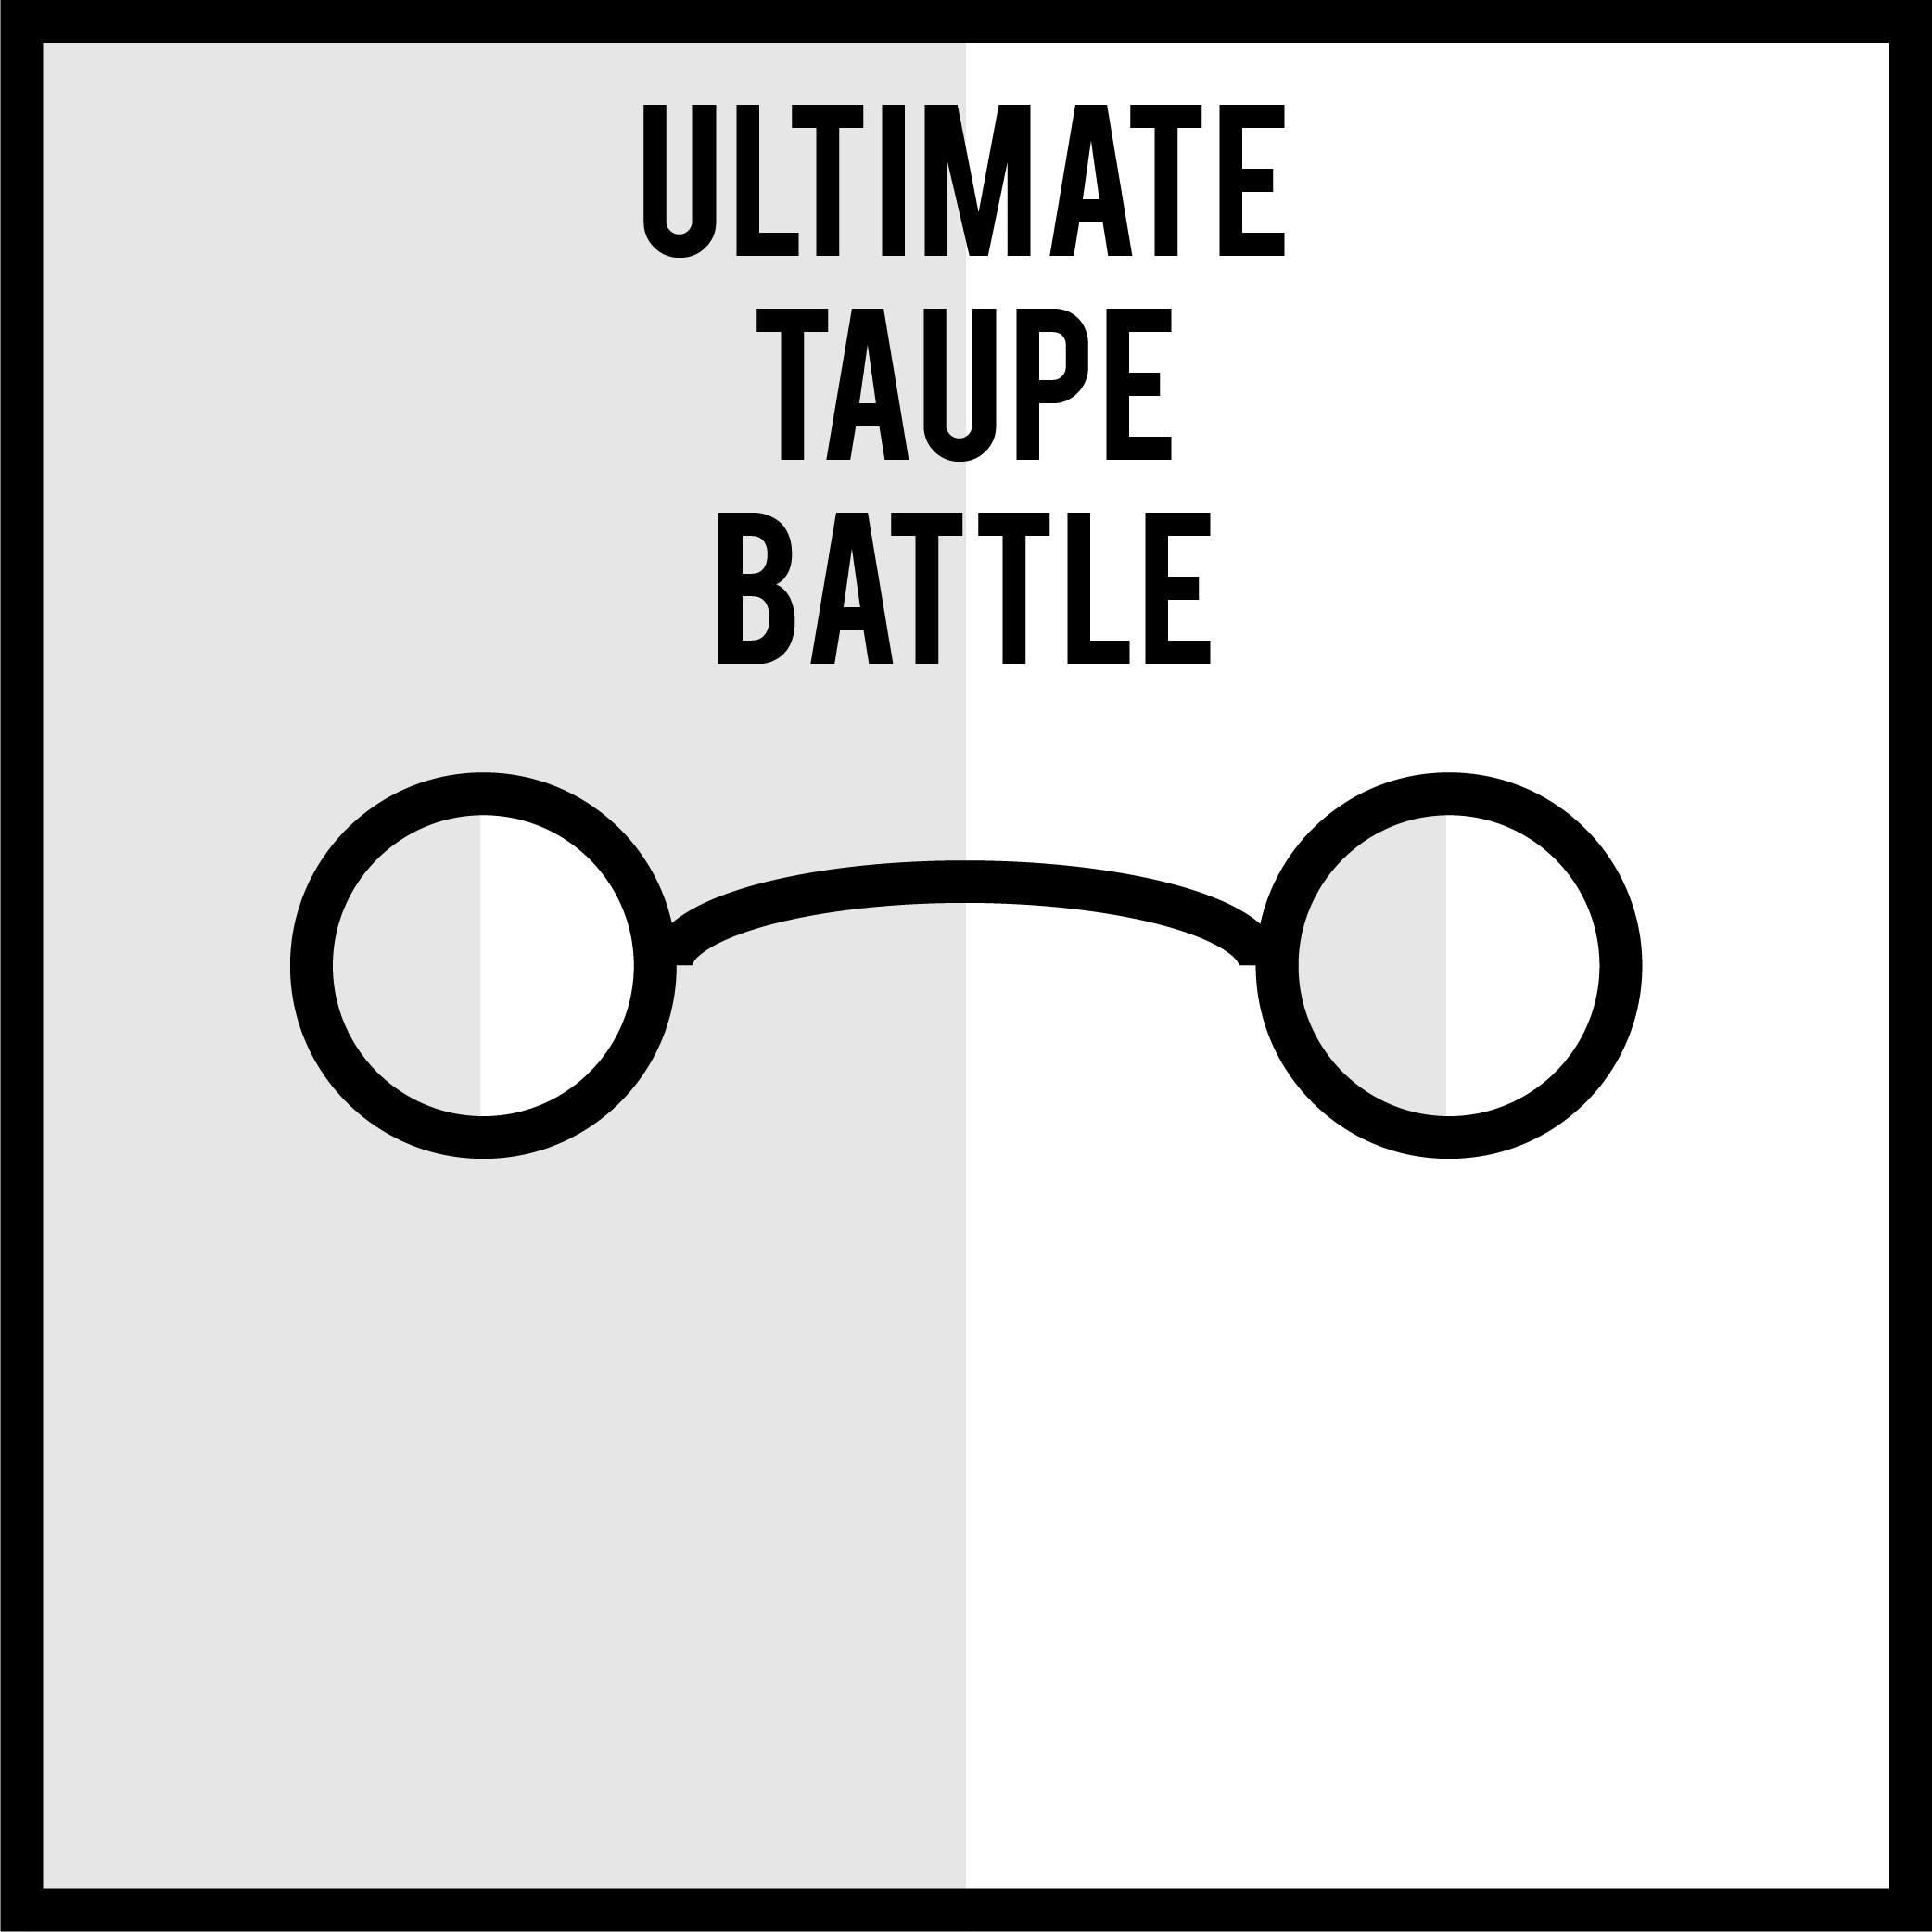 Ultimate Taupe Battle